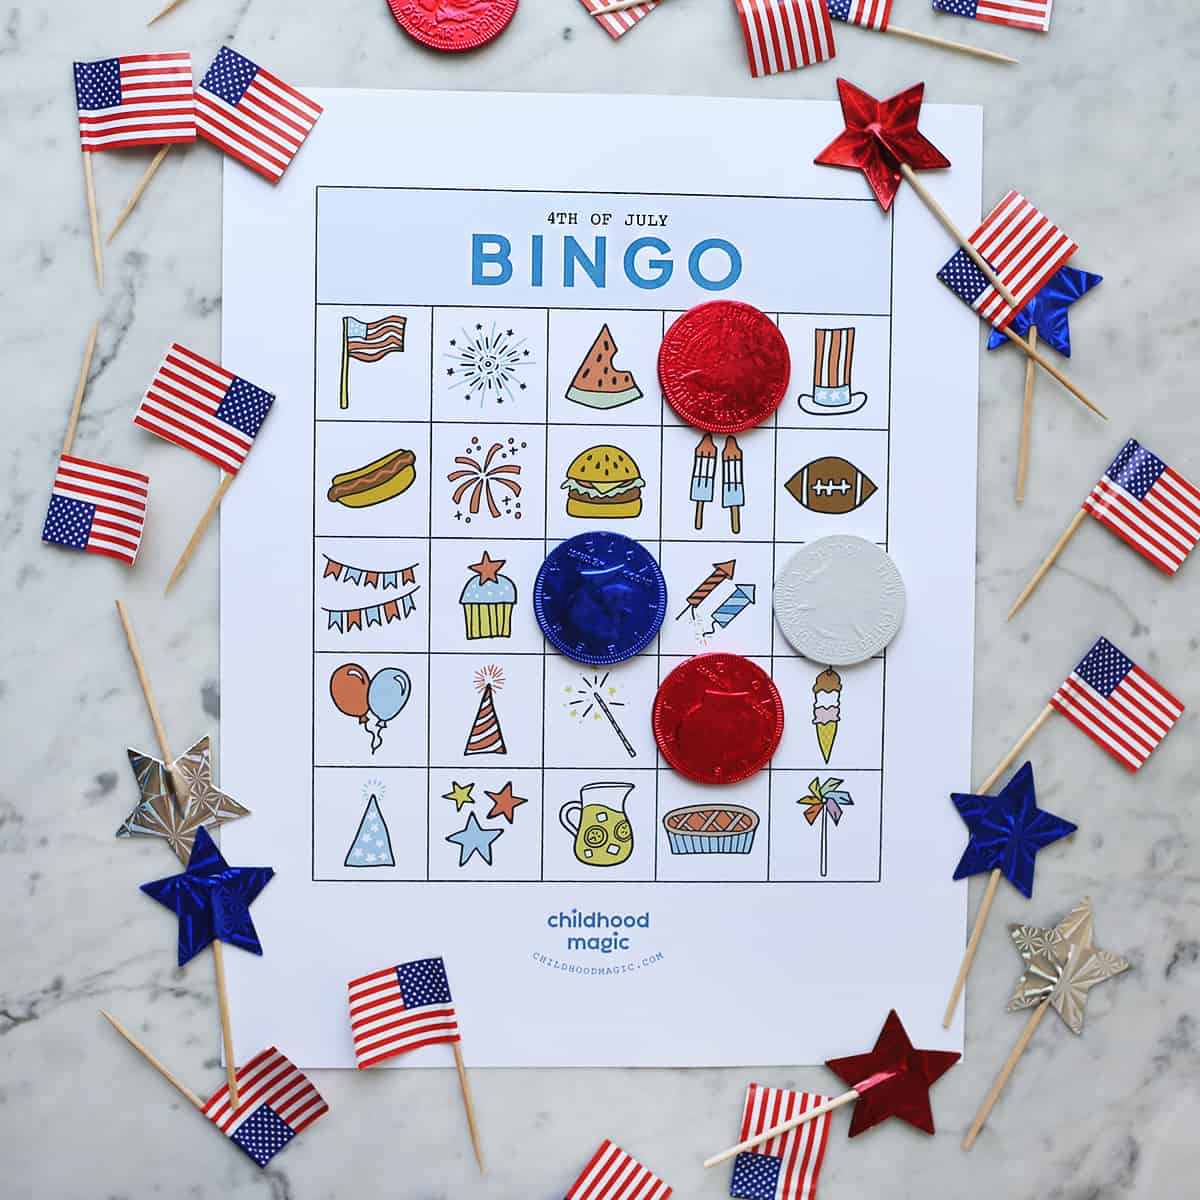 4th of July bingo cards on counter with red, white and blue coins as tokens. 